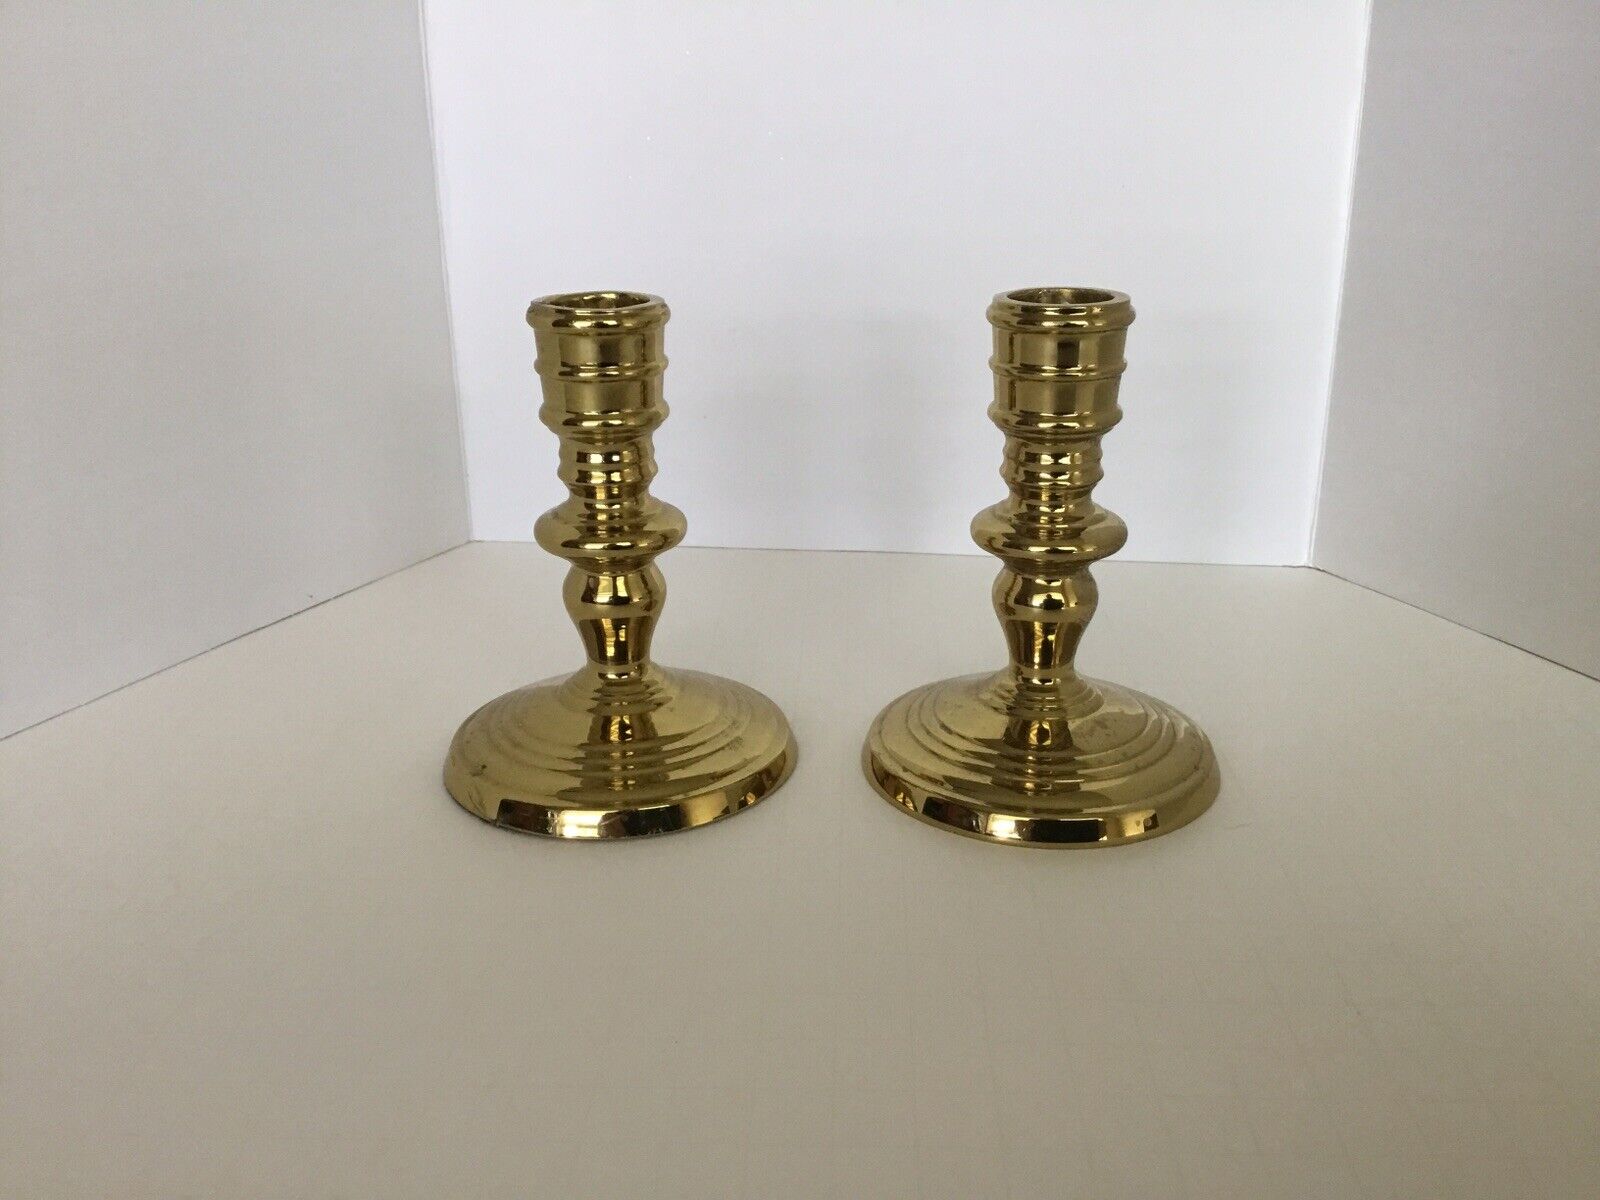 VTG heavy brass candlesticks,look  new, total weight of pair 2lb 3oz